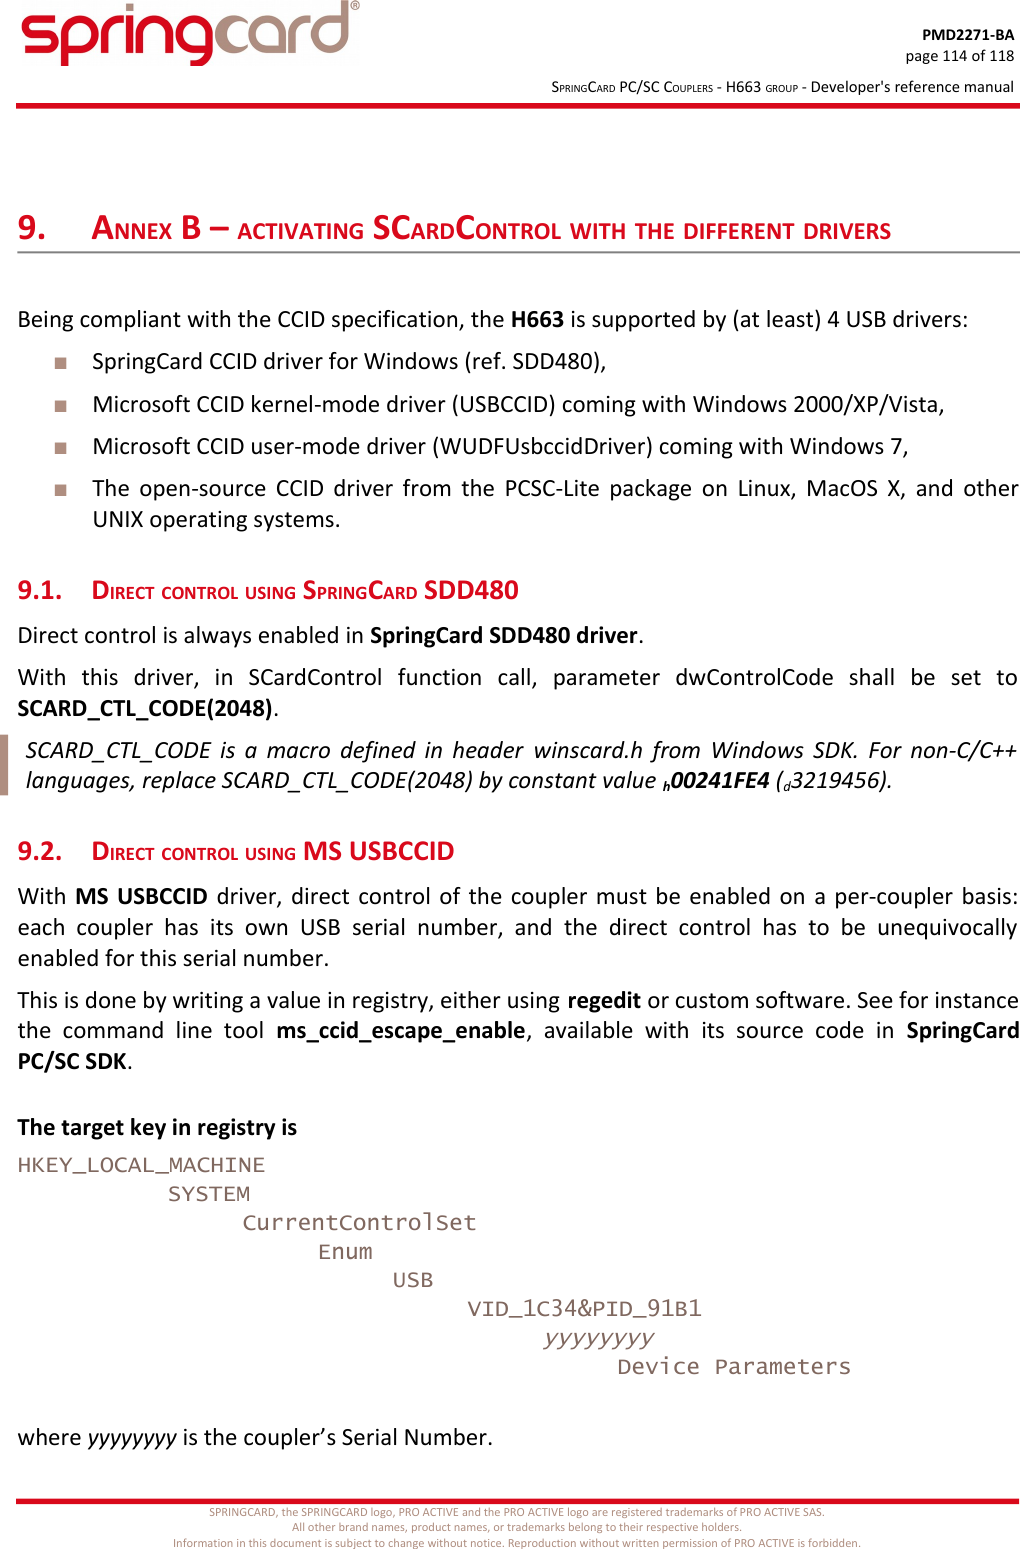 PMD2271-BApage 114 of 118SPRINGCARD PC/SC COUPLERS - H663 GROUP - Developer&apos;s reference manual9. ANNEX B – ACTIVATING SCARDCONTROL WITH THE DIFFERENT DRIVERSBeing compliant with the CCID specification, the H663 is supported by (at least) 4 USB drivers:SpringCard CCID driver for Windows (ref. SDD480),Microsoft CCID kernel-mode driver (USBCCID) coming with Windows 2000/XP/Vista,Microsoft CCID user-mode driver (WUDFUsbccidDriver) coming with Windows 7,The open-source CCID driver from the PCSC-Lite package on Linux, MacOS X, and otherUNIX operating systems.9.1. DIRECT CONTROL USING SPRINGCARD SDD480Direct control is always enabled in SpringCard SDD480 driver.With   this   driver,   in   SCardControl   function   call,   parameter   dwControlCode   shall   be   set   toSCARD_CTL_CODE(2048).SCARD_CTL_CODE is a macro defined in header  winscard.h  from Windows SDK. For non-C/C++languages, replace SCARD_CTL_CODE(2048) by constant value h00241FE4 (d3219456).9.2. DIRECT CONTROL USING MS USBCCIDWith MS USBCCID  driver, direct control of the coupler must be enabled on a per-coupler basis:each coupler has  its   own  USB  serial  number,   and   the  direct  control has   to  be  unequivocallyenabled for this serial number.This is done by writing a value in registry, either using regedit or custom software. See for instancethe  command   line   tool  ms_ccid_escape_enable,   available  with   its   source   code  in  SpringCardPC/SC SDK.The target key in registry isHKEY_LOCAL_MACHINESYSTEMCurrentControlSetEnumUSBVID_1C34&amp;PID_91B1yyyyyyyyDevice Parameterswhere yyyyyyyy is the coupler’s Serial Number.SPRINGCARD, the SPRINGCARD logo, PRO ACTIVE and the PRO ACTIVE logo are registered trademarks of PRO ACTIVE SAS.All other brand names, product names, or trademarks belong to their respective holders.Information in this document is subject to change without notice. Reproduction without written permission of PRO ACTIVE is forbidden.